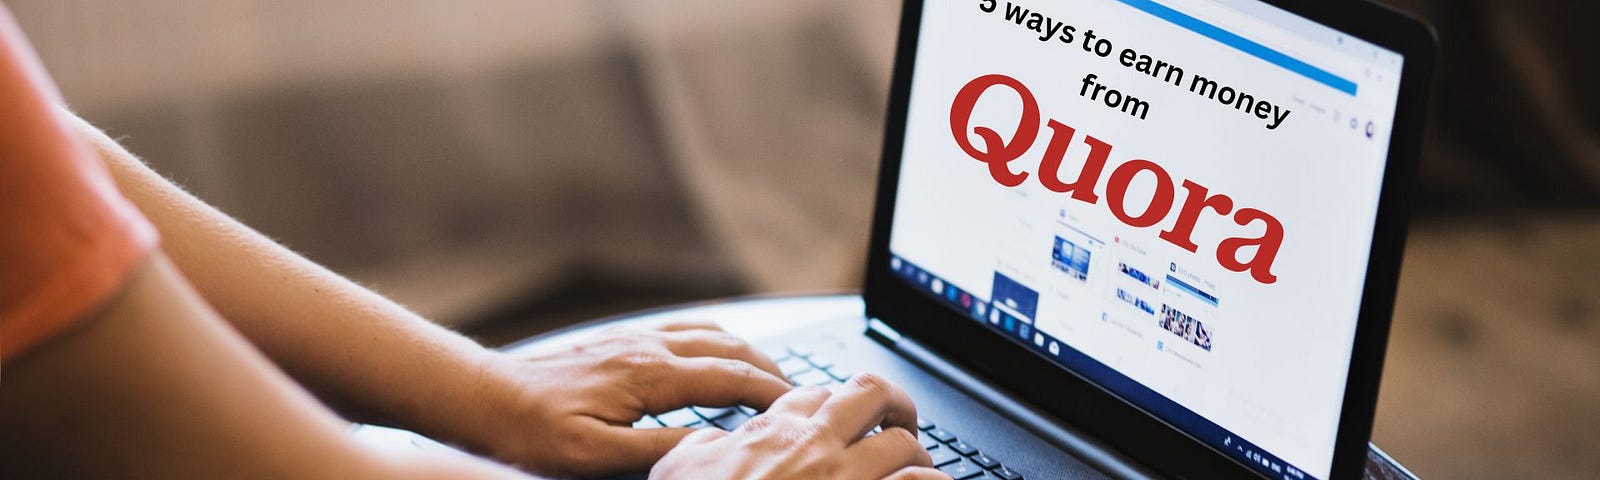 5 ways to earn money from Quora Generate online income source via Quora by Arbab Z at earn check medium.com